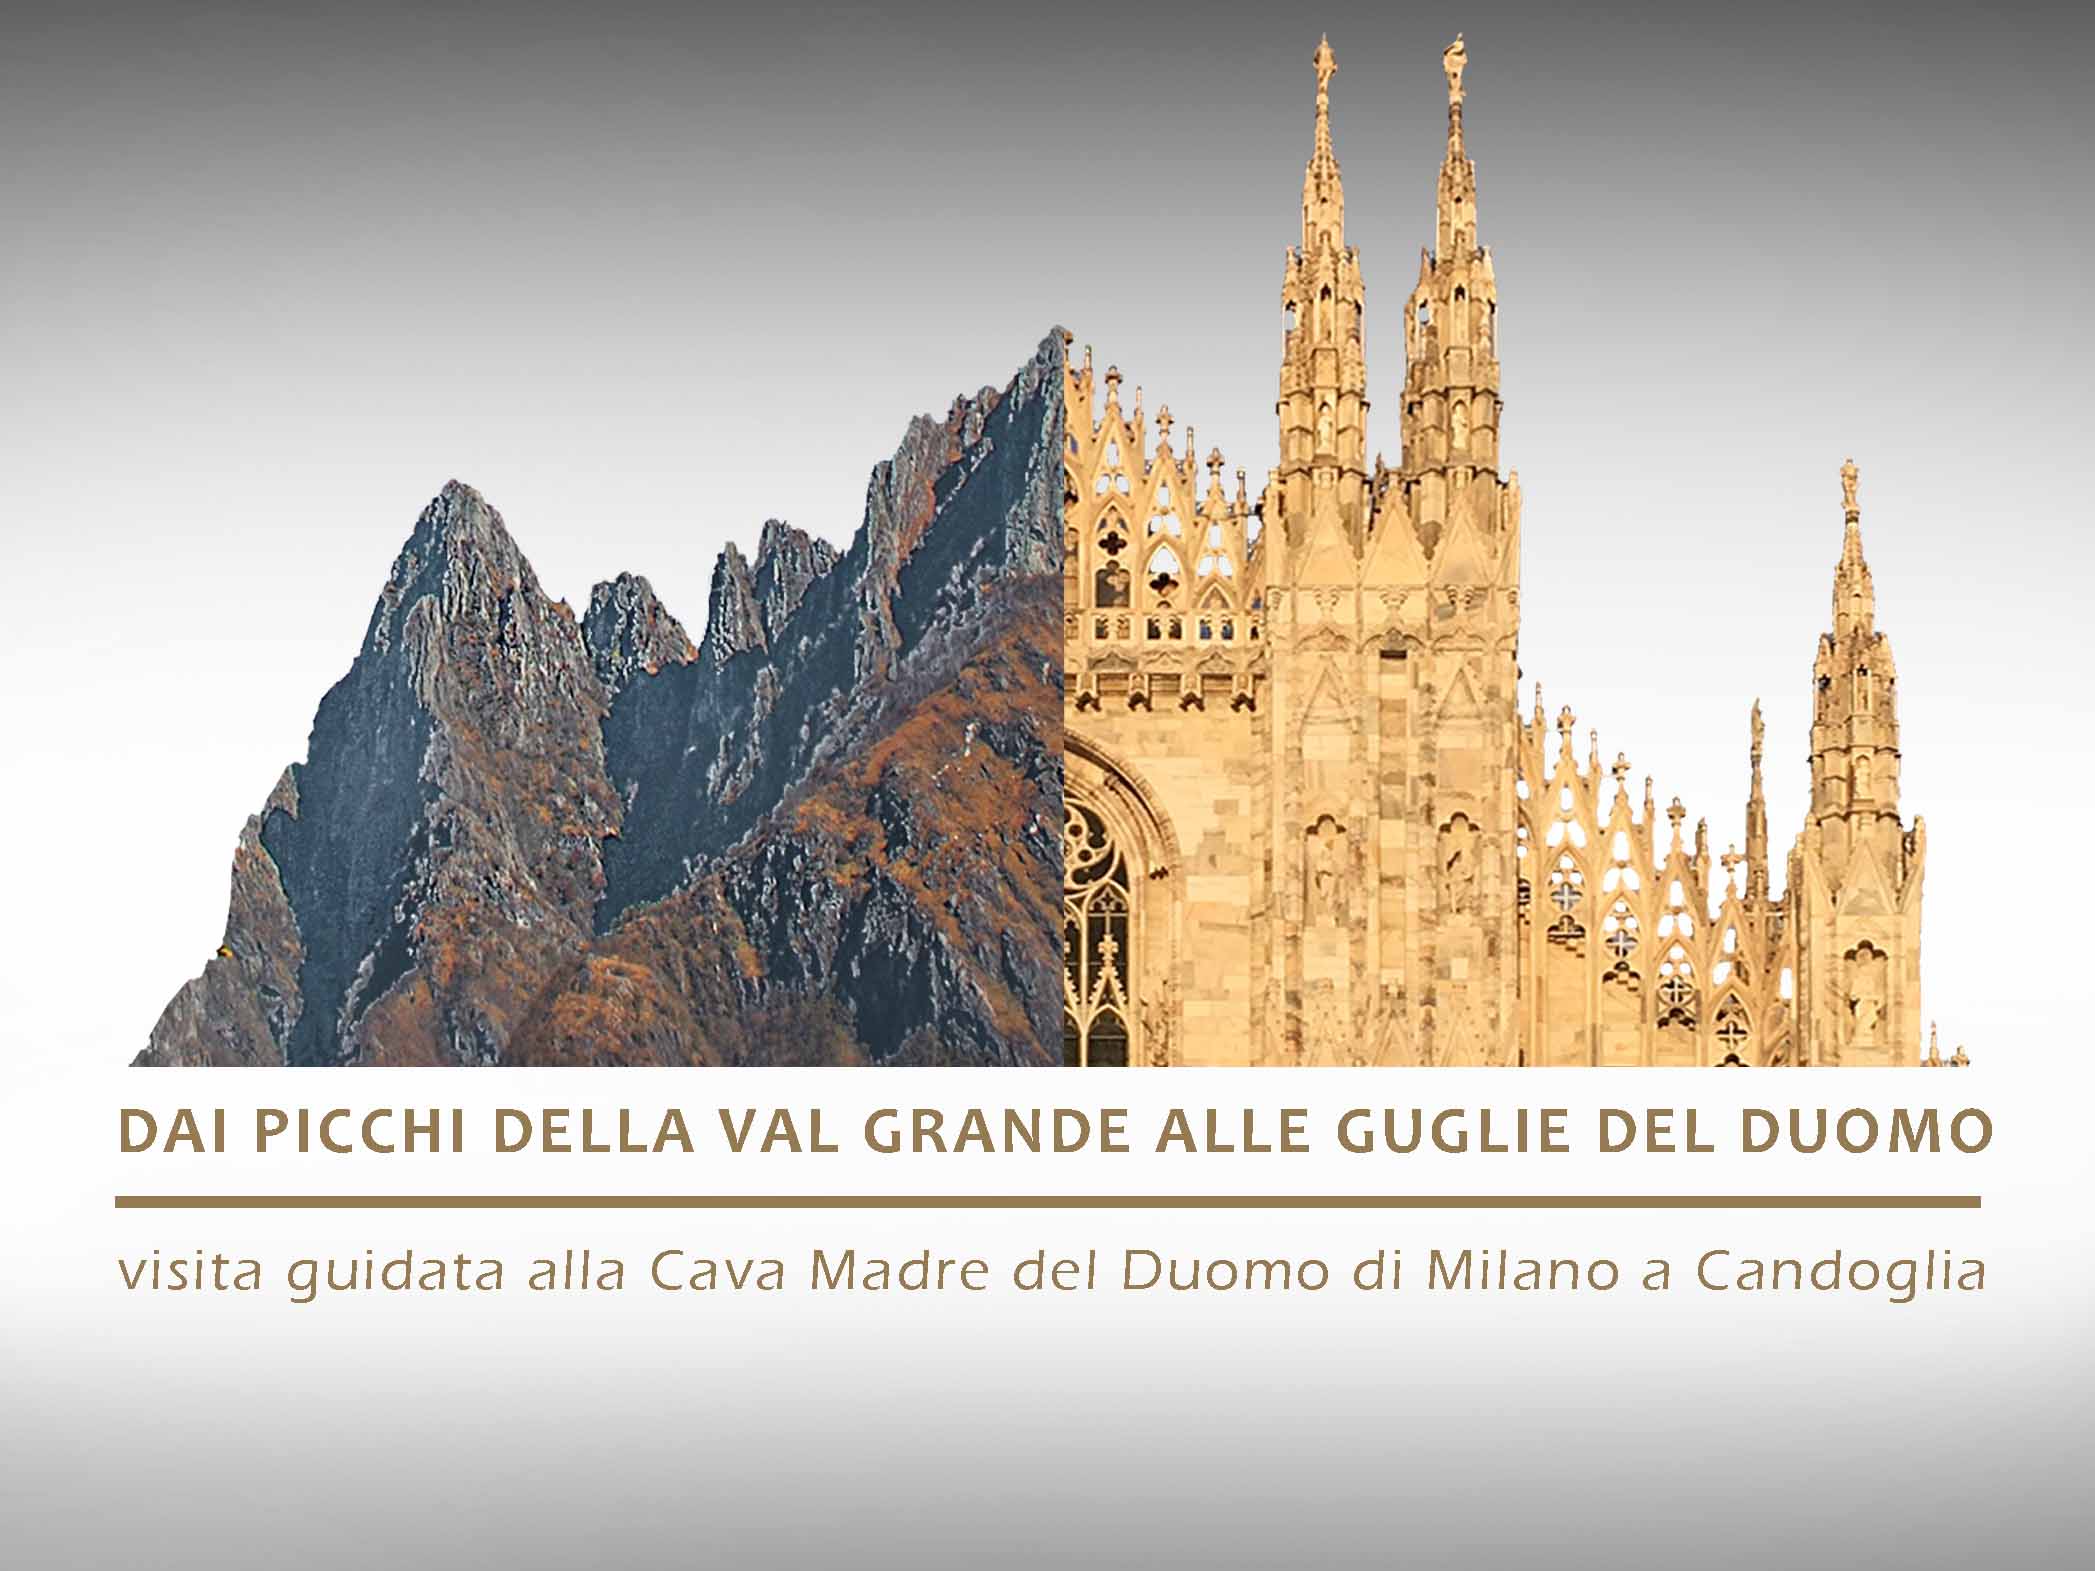 Registration is open for visiting the Milan Cathedral's Cava Madre in Candoglia